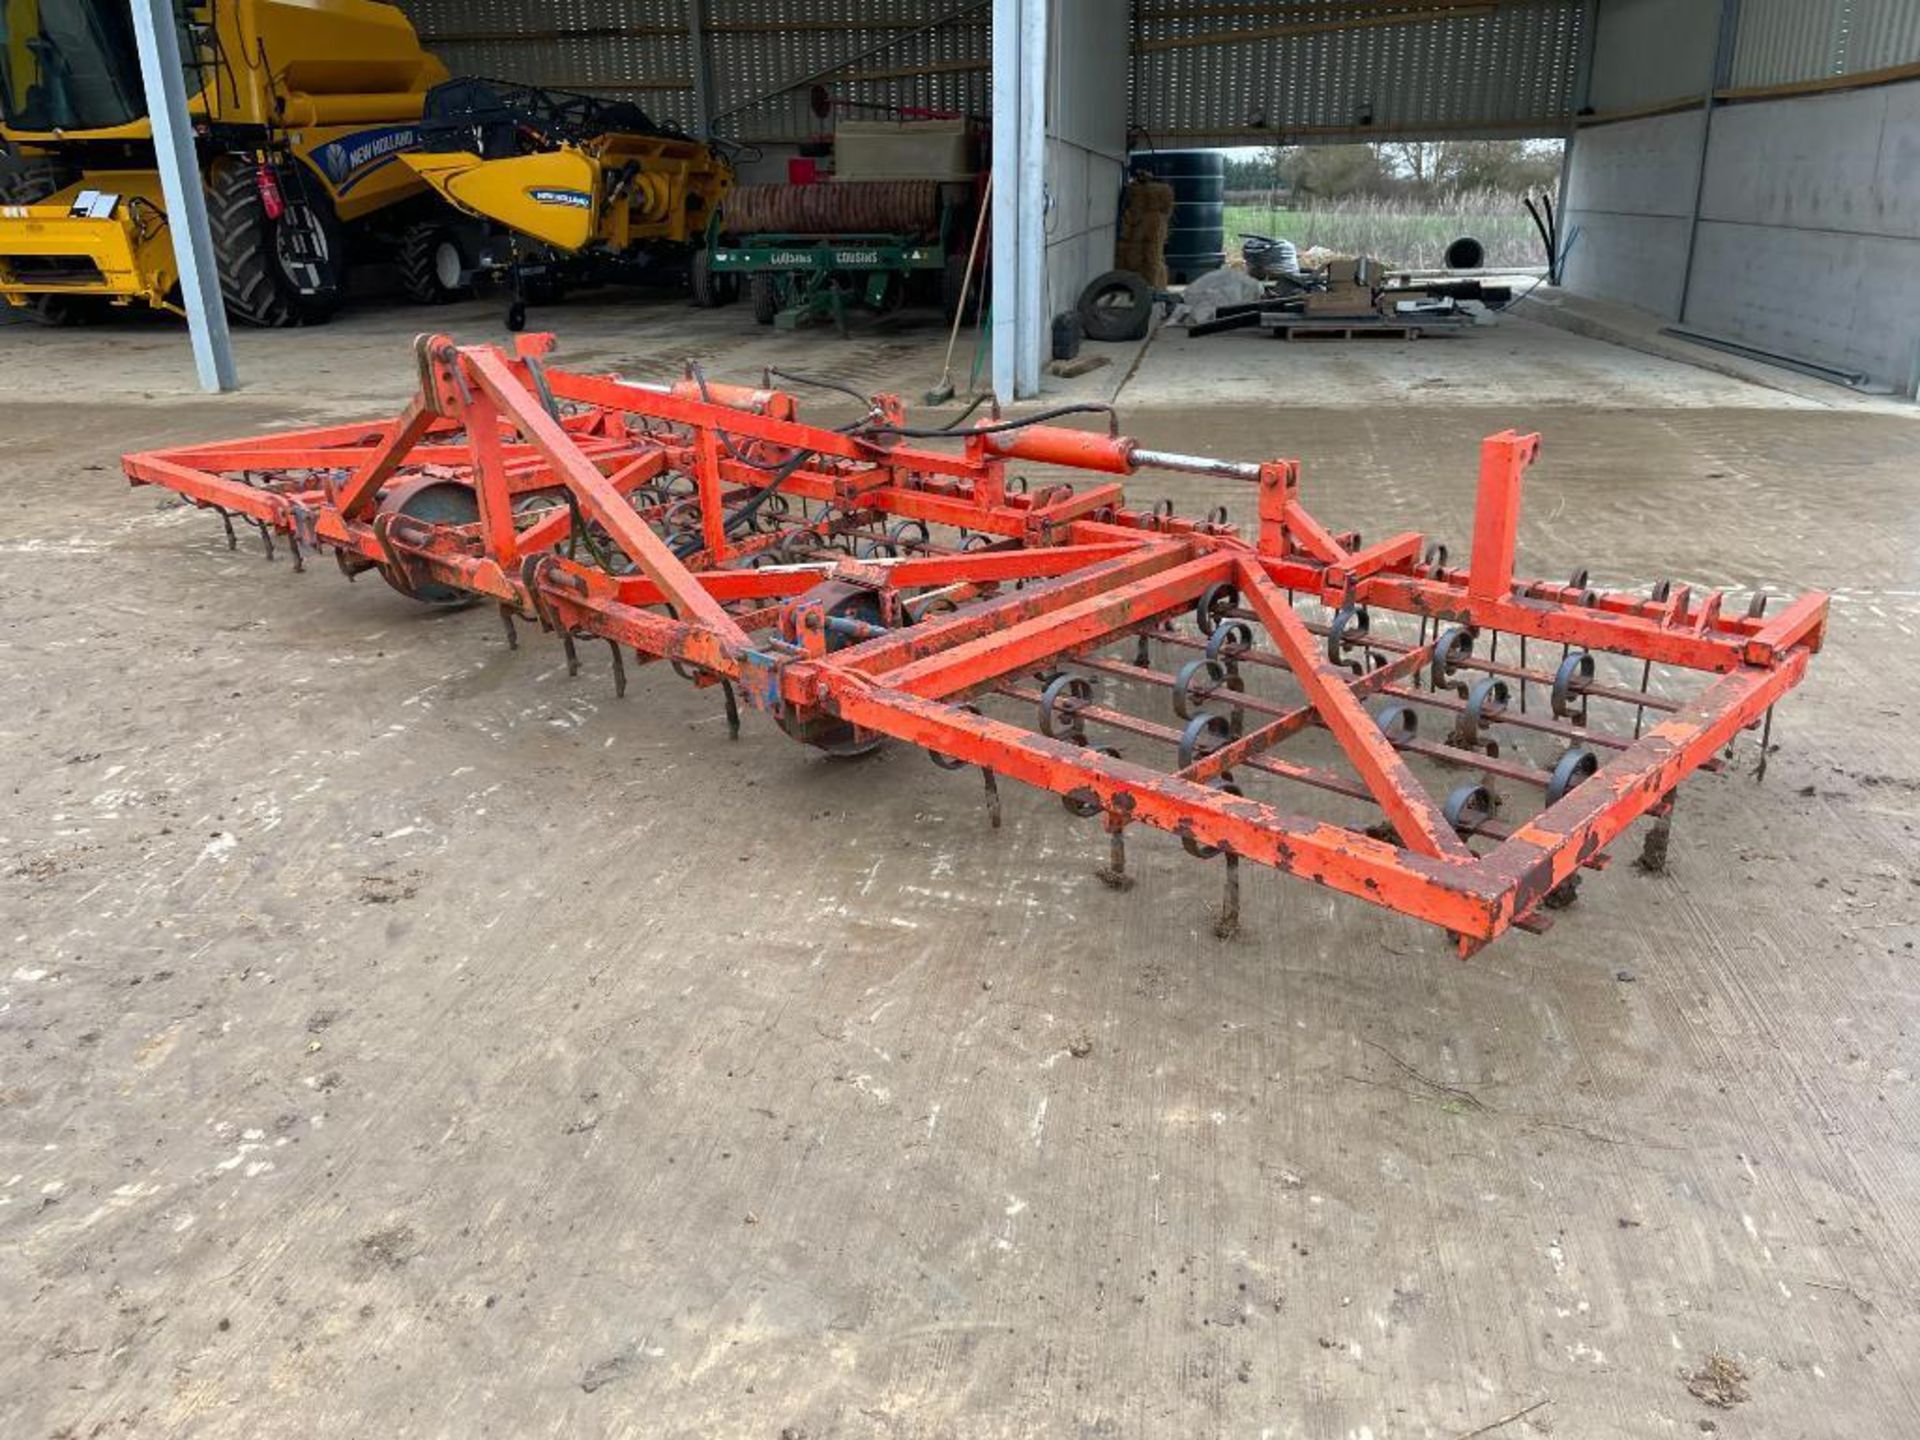 Springtine cultivator 6m hydraulic folding with following tines - Image 3 of 10